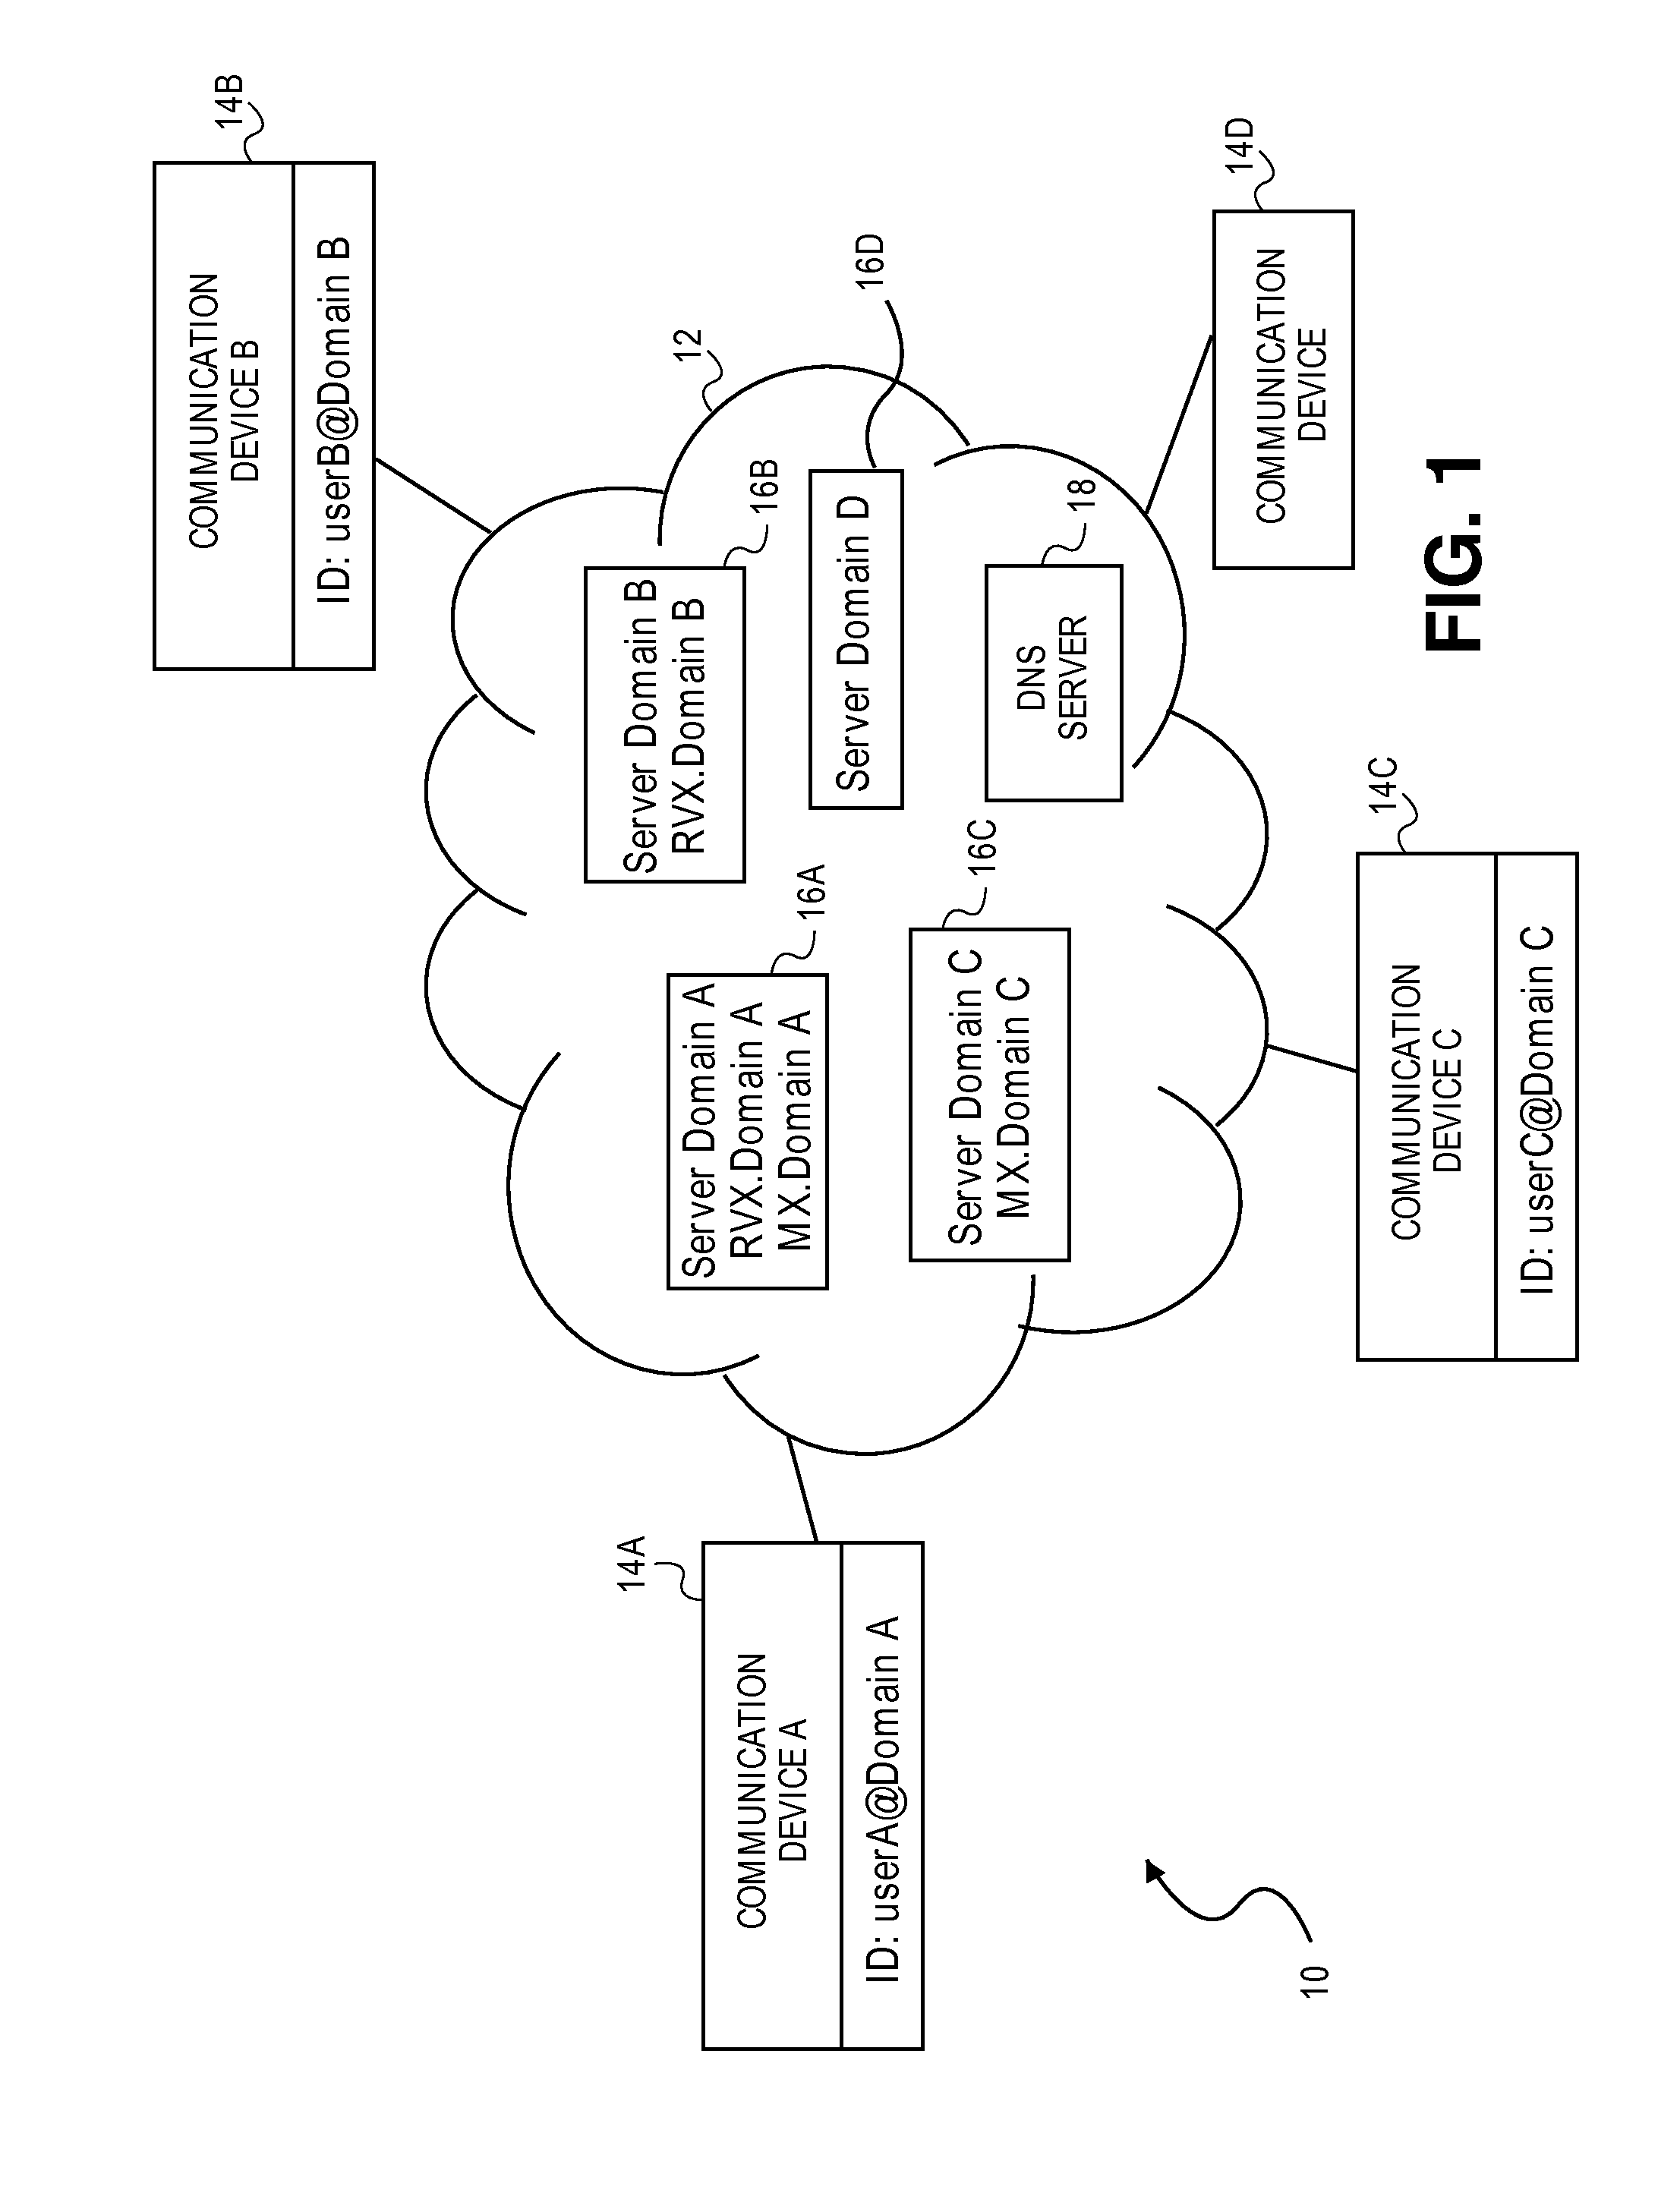 Late binding communication system and method for real-time communication of time-based media